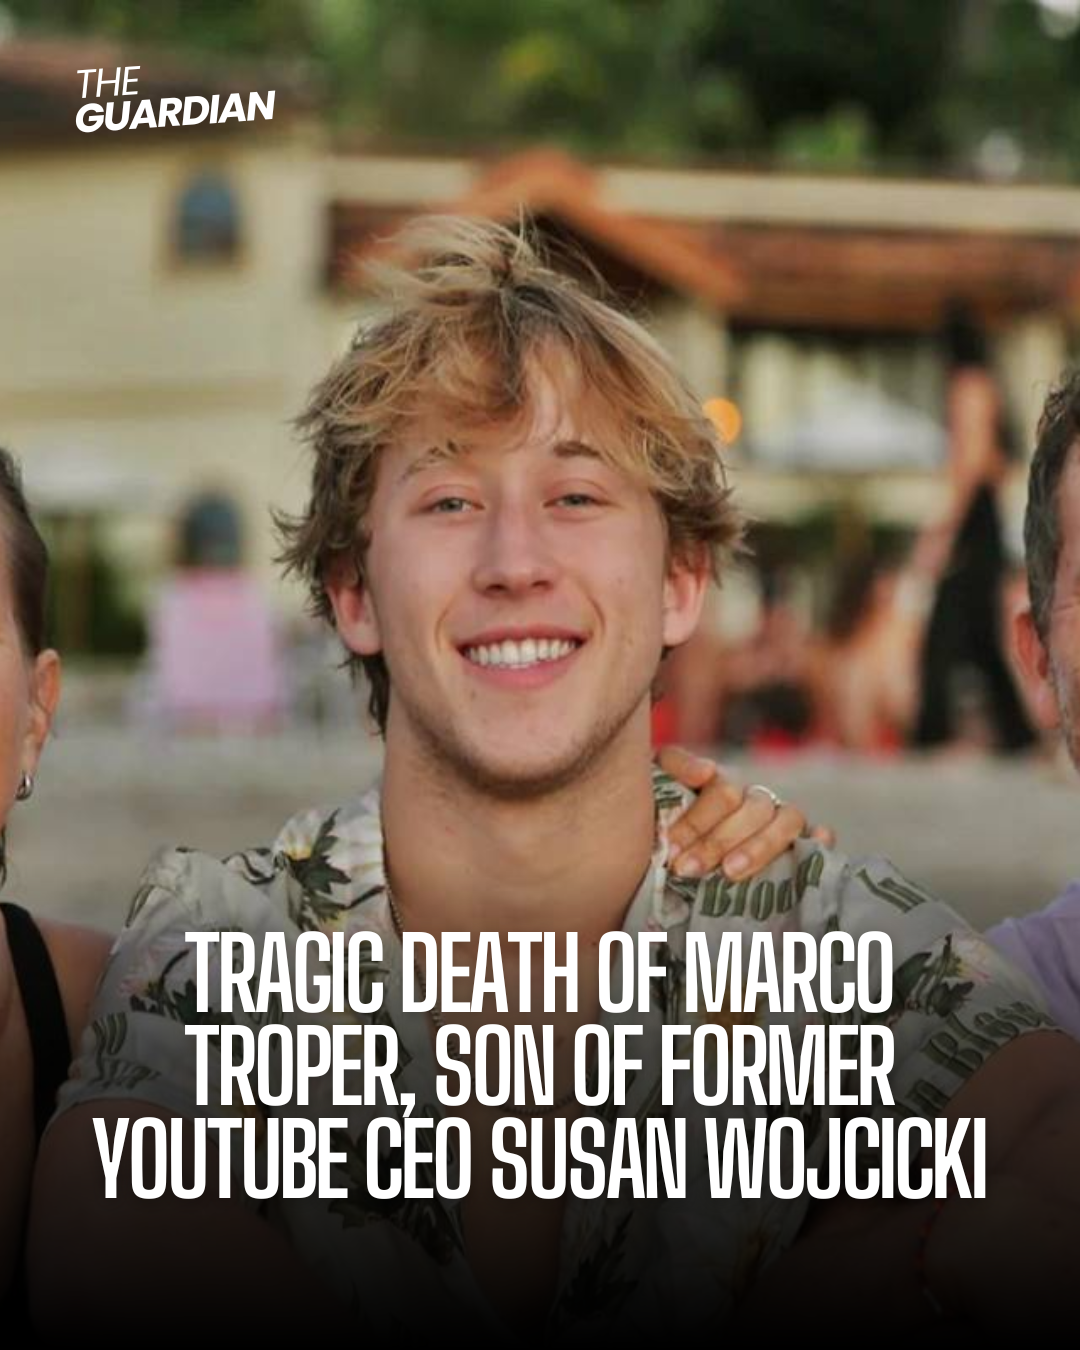 Marco Troper, the son of former YouTube CEO Susan Wojcicki, died at the age of 19.